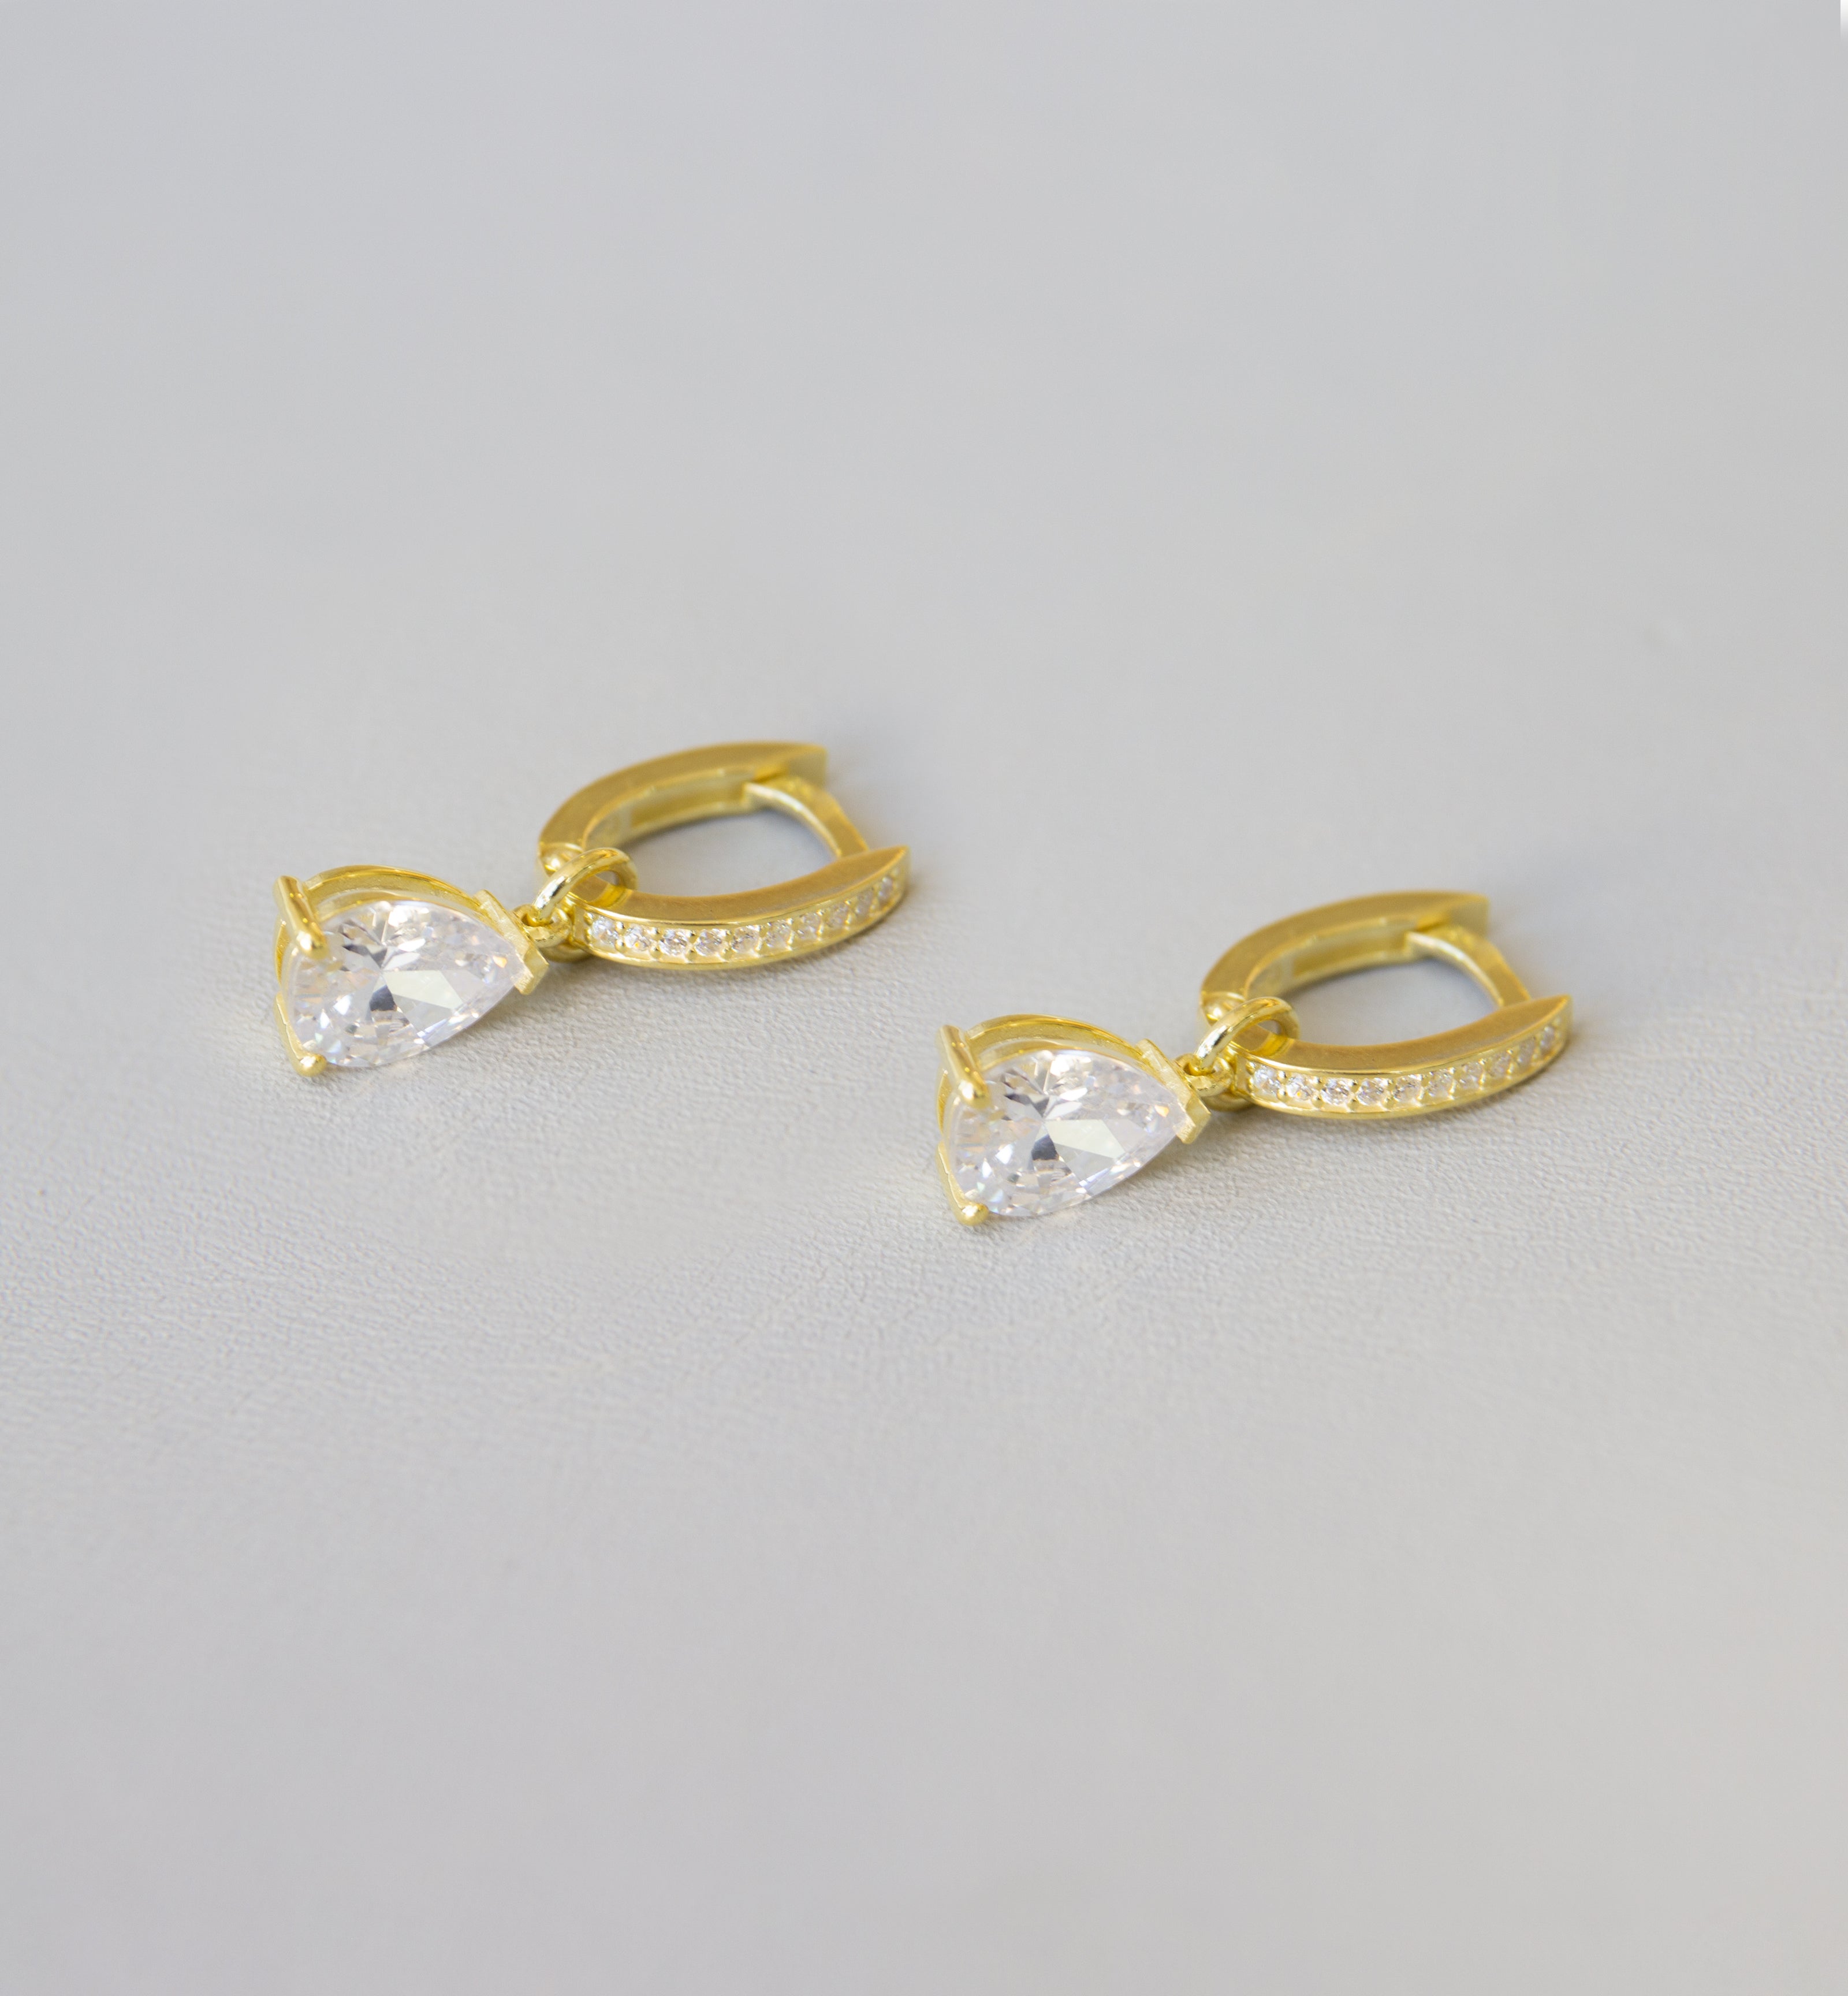 Silver 925 Yellow Gold Plated Hoop Earrings